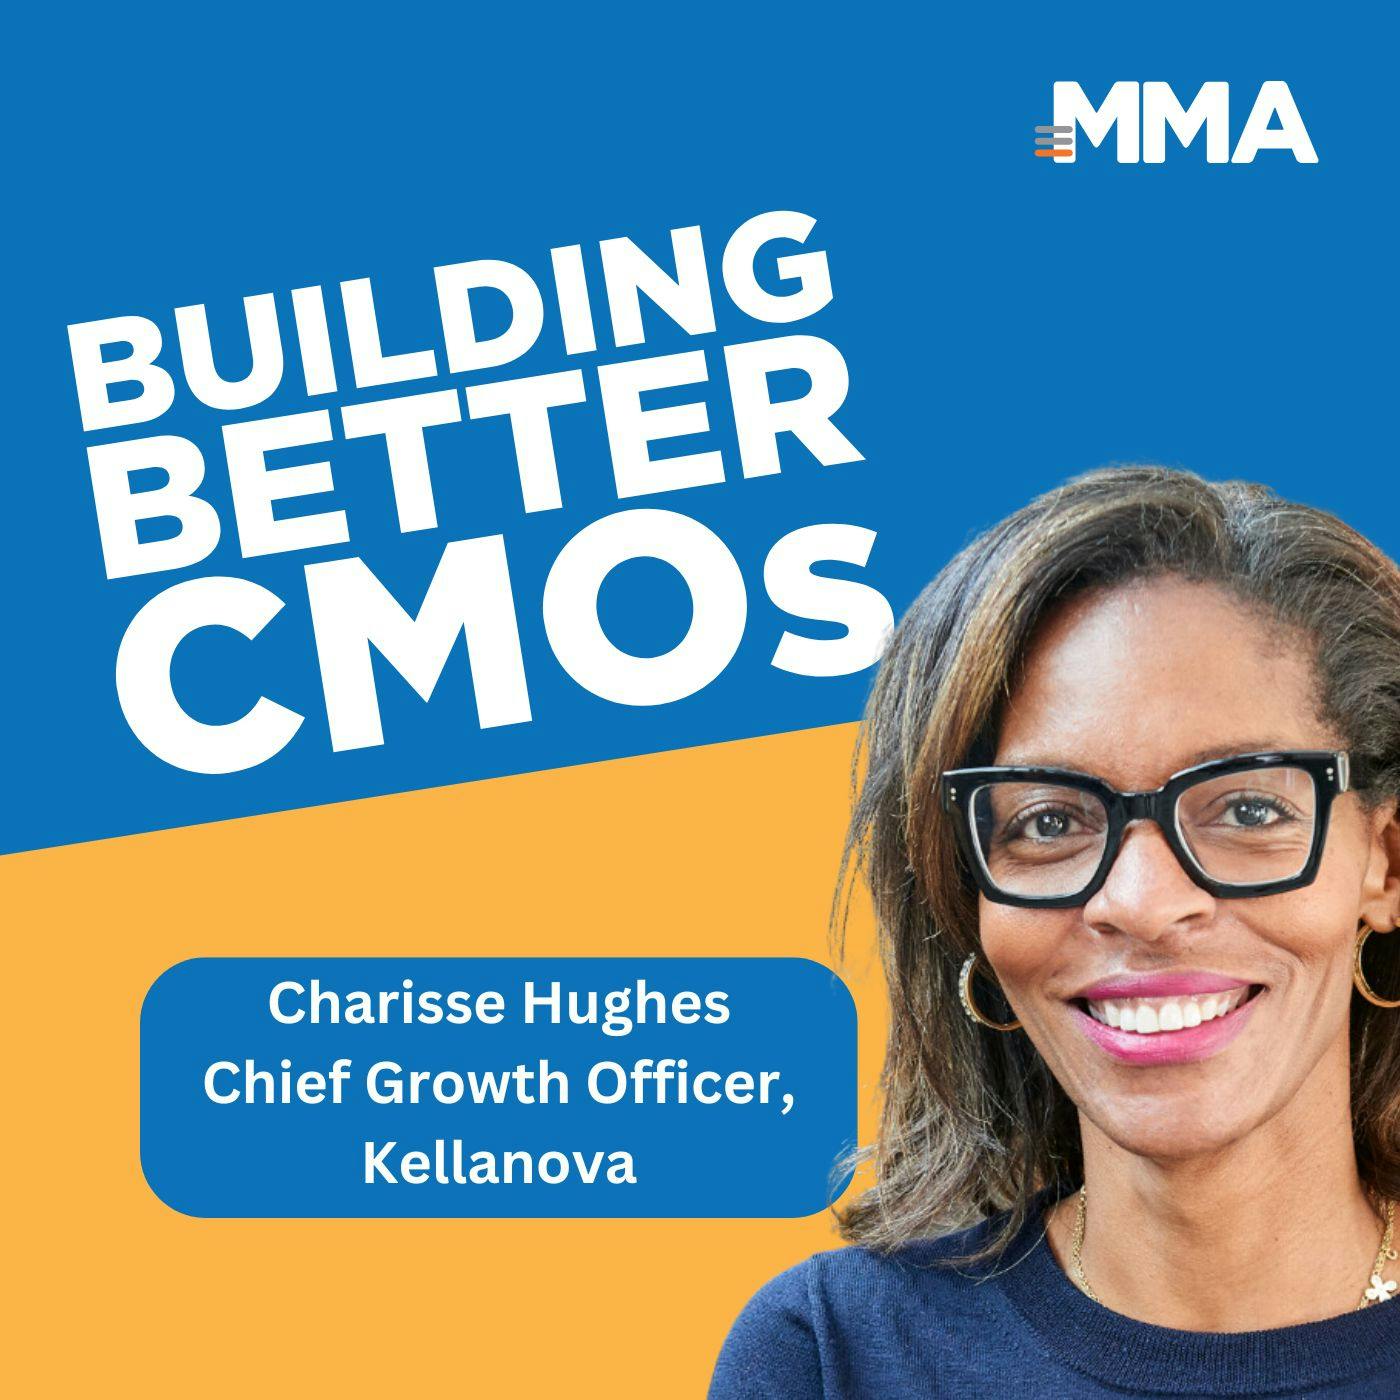 Charisse Hughes, Chief Growth Officer at Kellanova: Evolution of the CMO